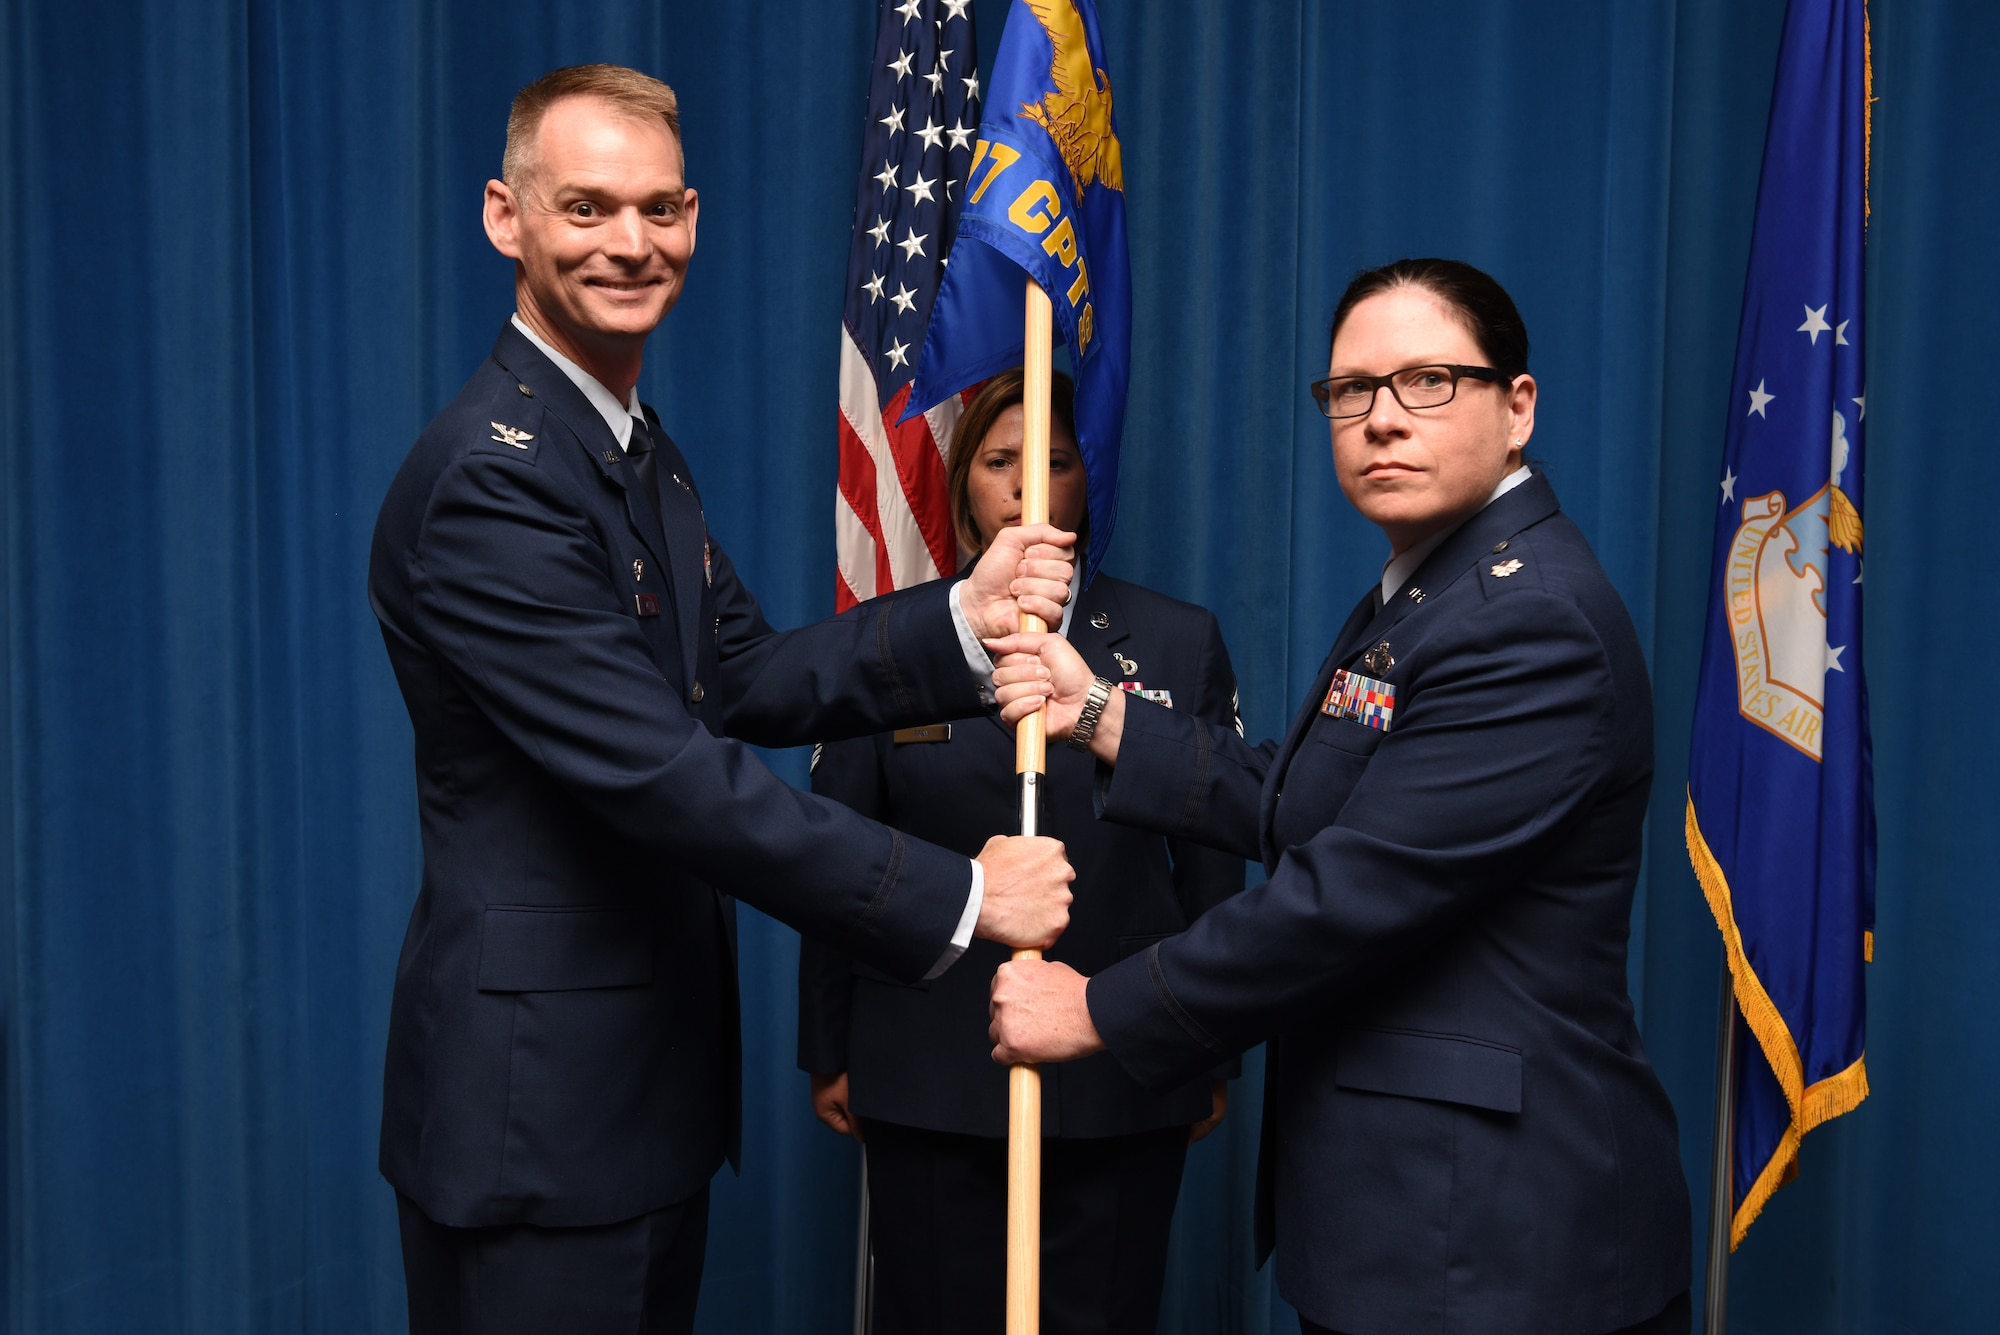 U.S. Air Force Lt. Col. Shay Edwards (right), accepts the guidon and command of the 377th Comptroller Squadron from Col. David Miller, 377th Air Base Wing commander, during a change of command ceremony at Kirtland Air Force Base, N.M., July 31, 2019. Edwards previously served as the U.S. Air Forces in Europe and Africa Budget and Operations Branch Chief. (U.S. Air Force photo by Senior Airman Eli Chevalier)